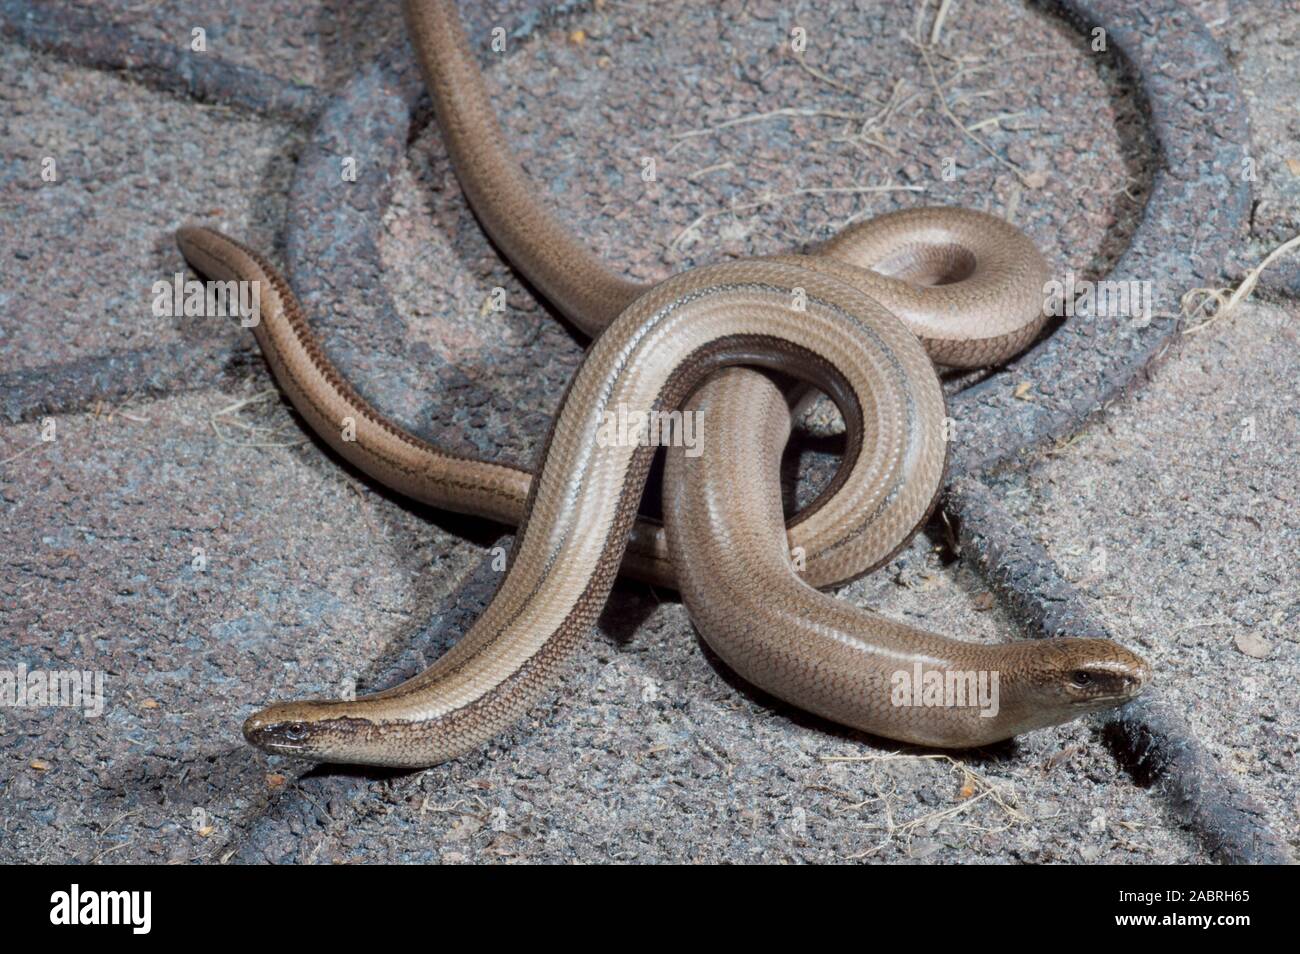 SLOW WORMS pair Anguis fragilis  female head left, male right..  On lid of garden  composting bin. Stock Photo